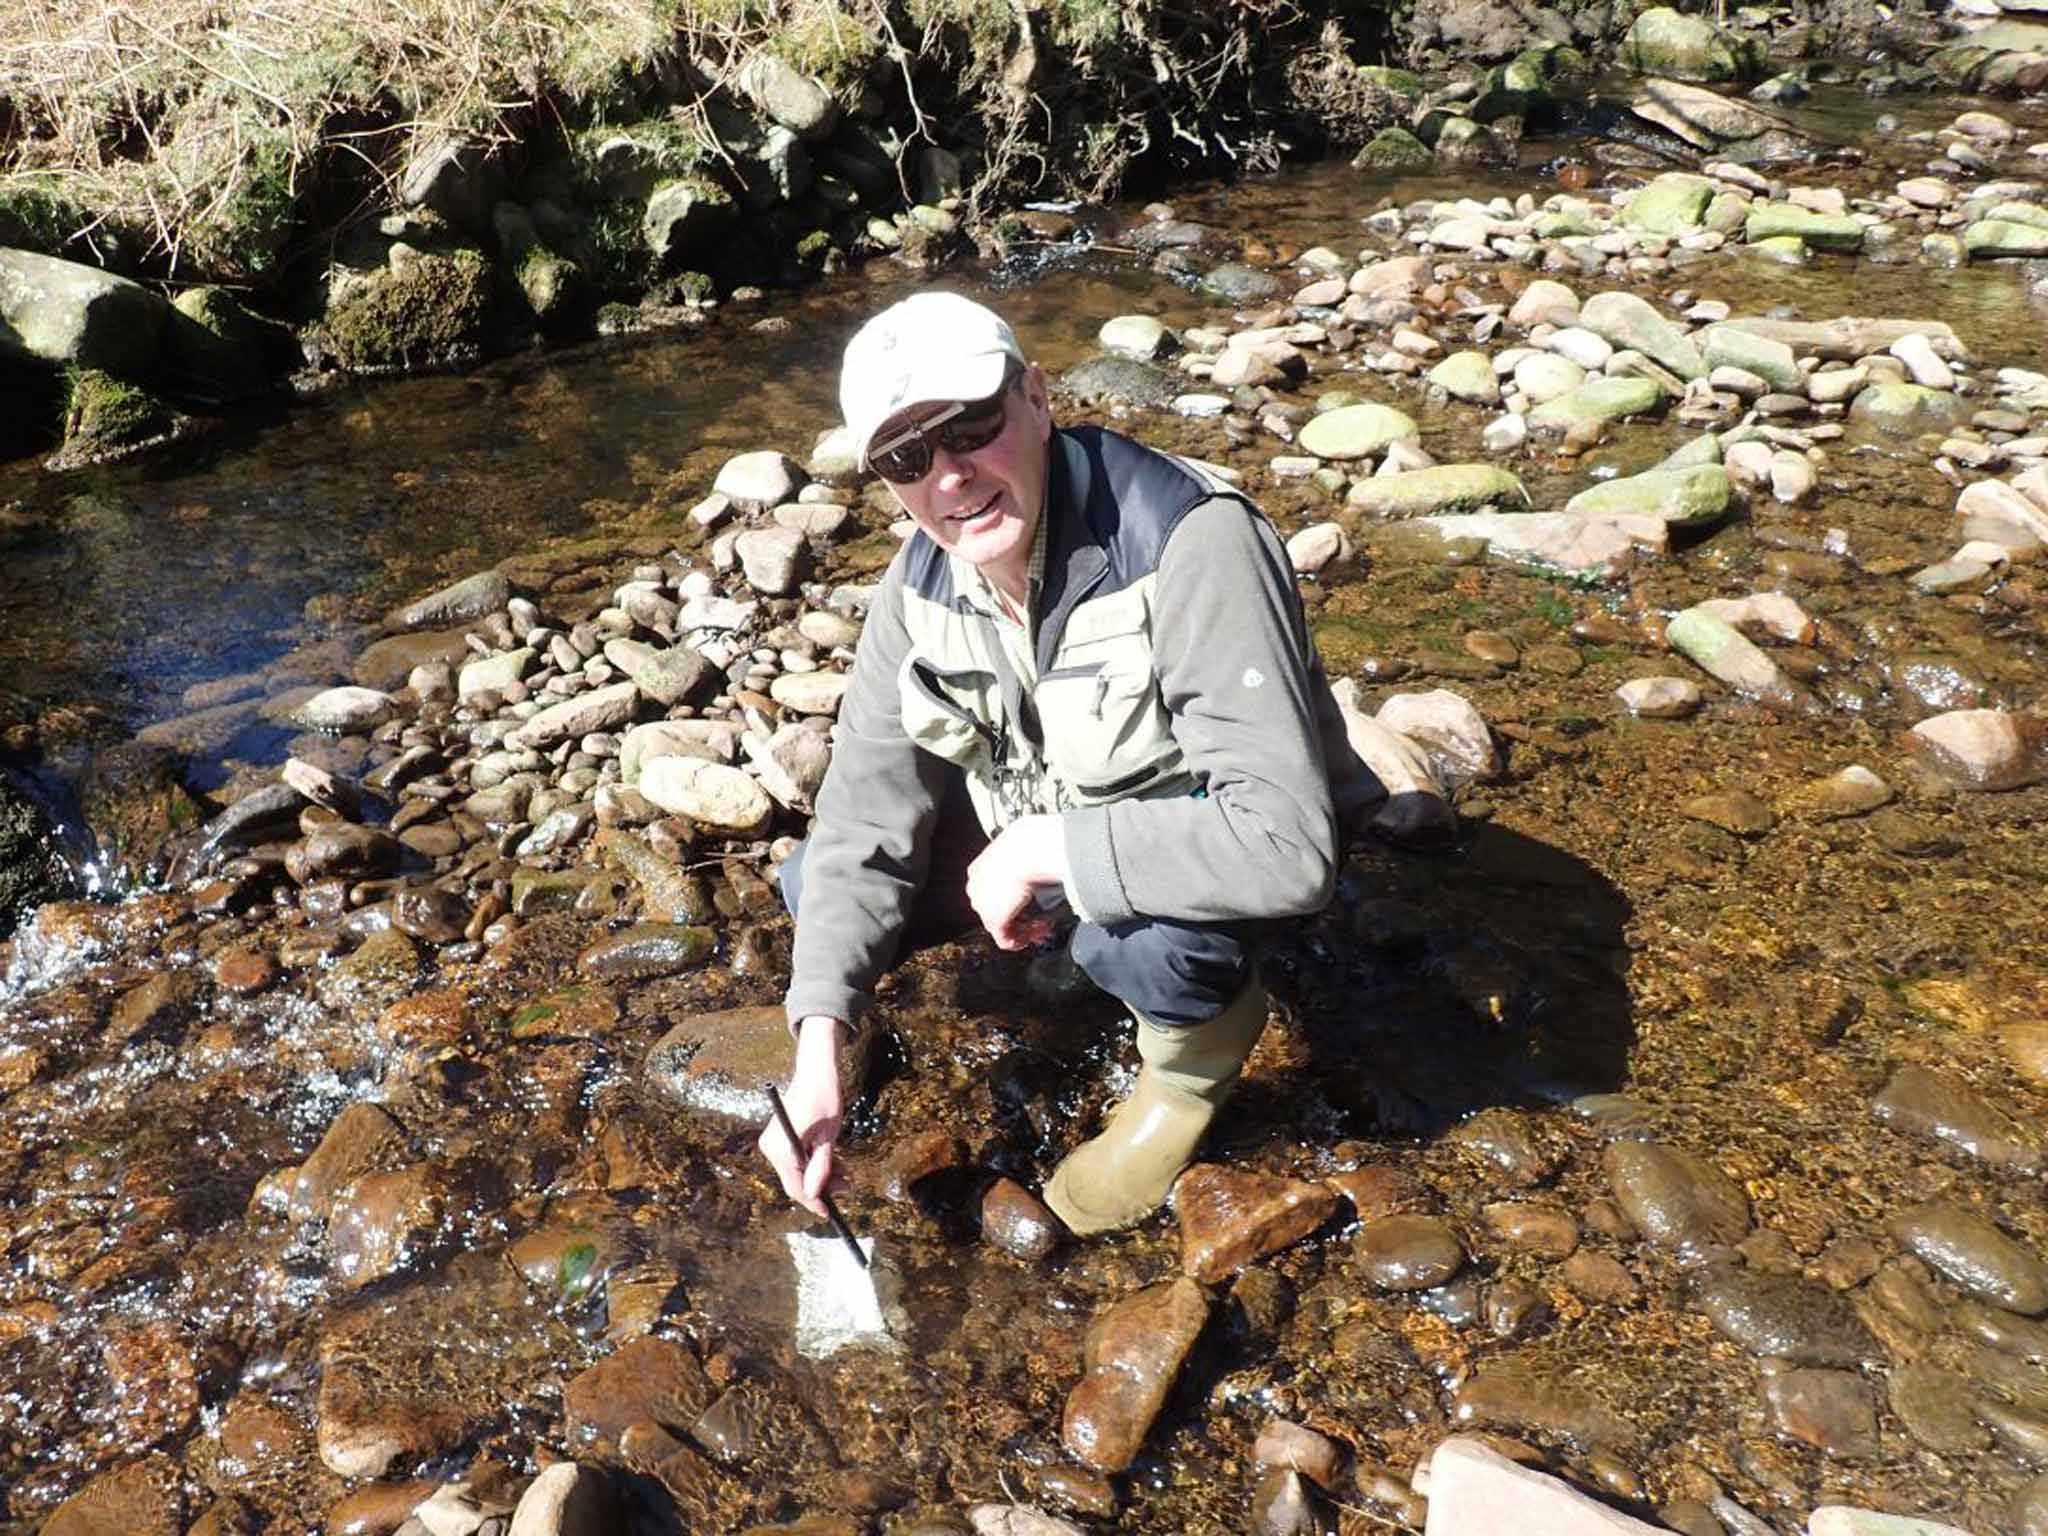 &#13;
Stuart Crofts describes himself as ‘one-third fisherman, one-third entomologist and one-third overtaken by a childlike enthusiasm for all nature’&#13;